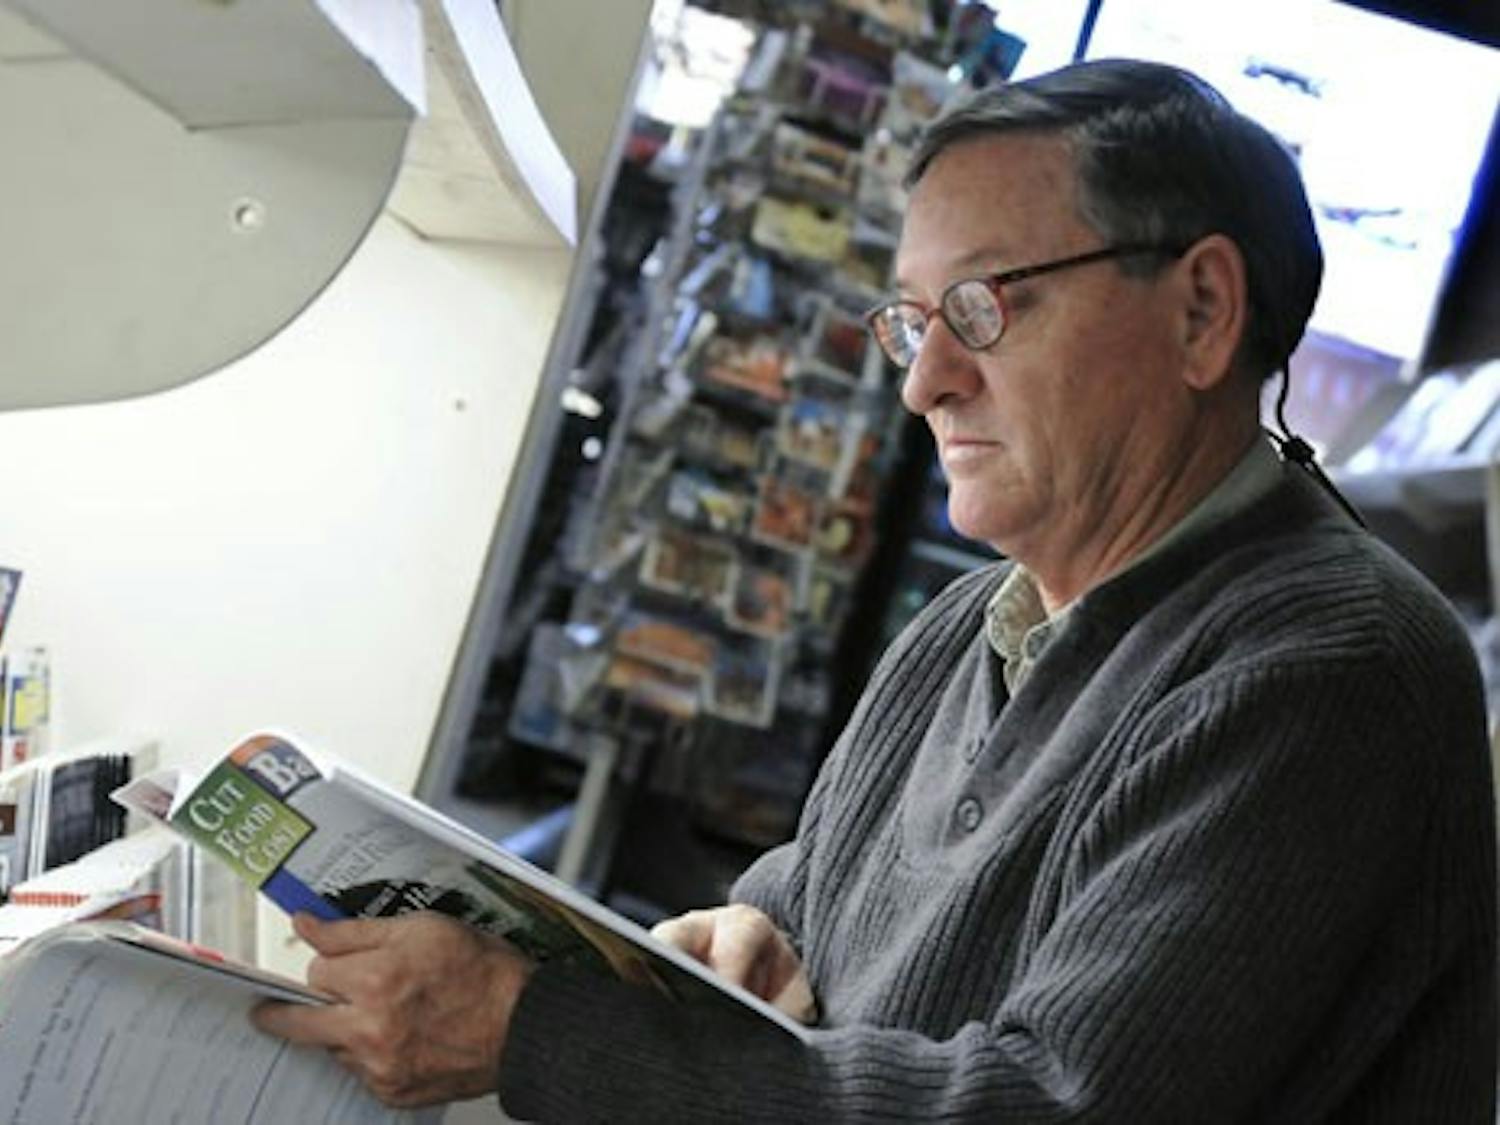 Chris West looks at a magazine at Newsland Bookstore, a magazine and newspaper shop on Central Avenue.